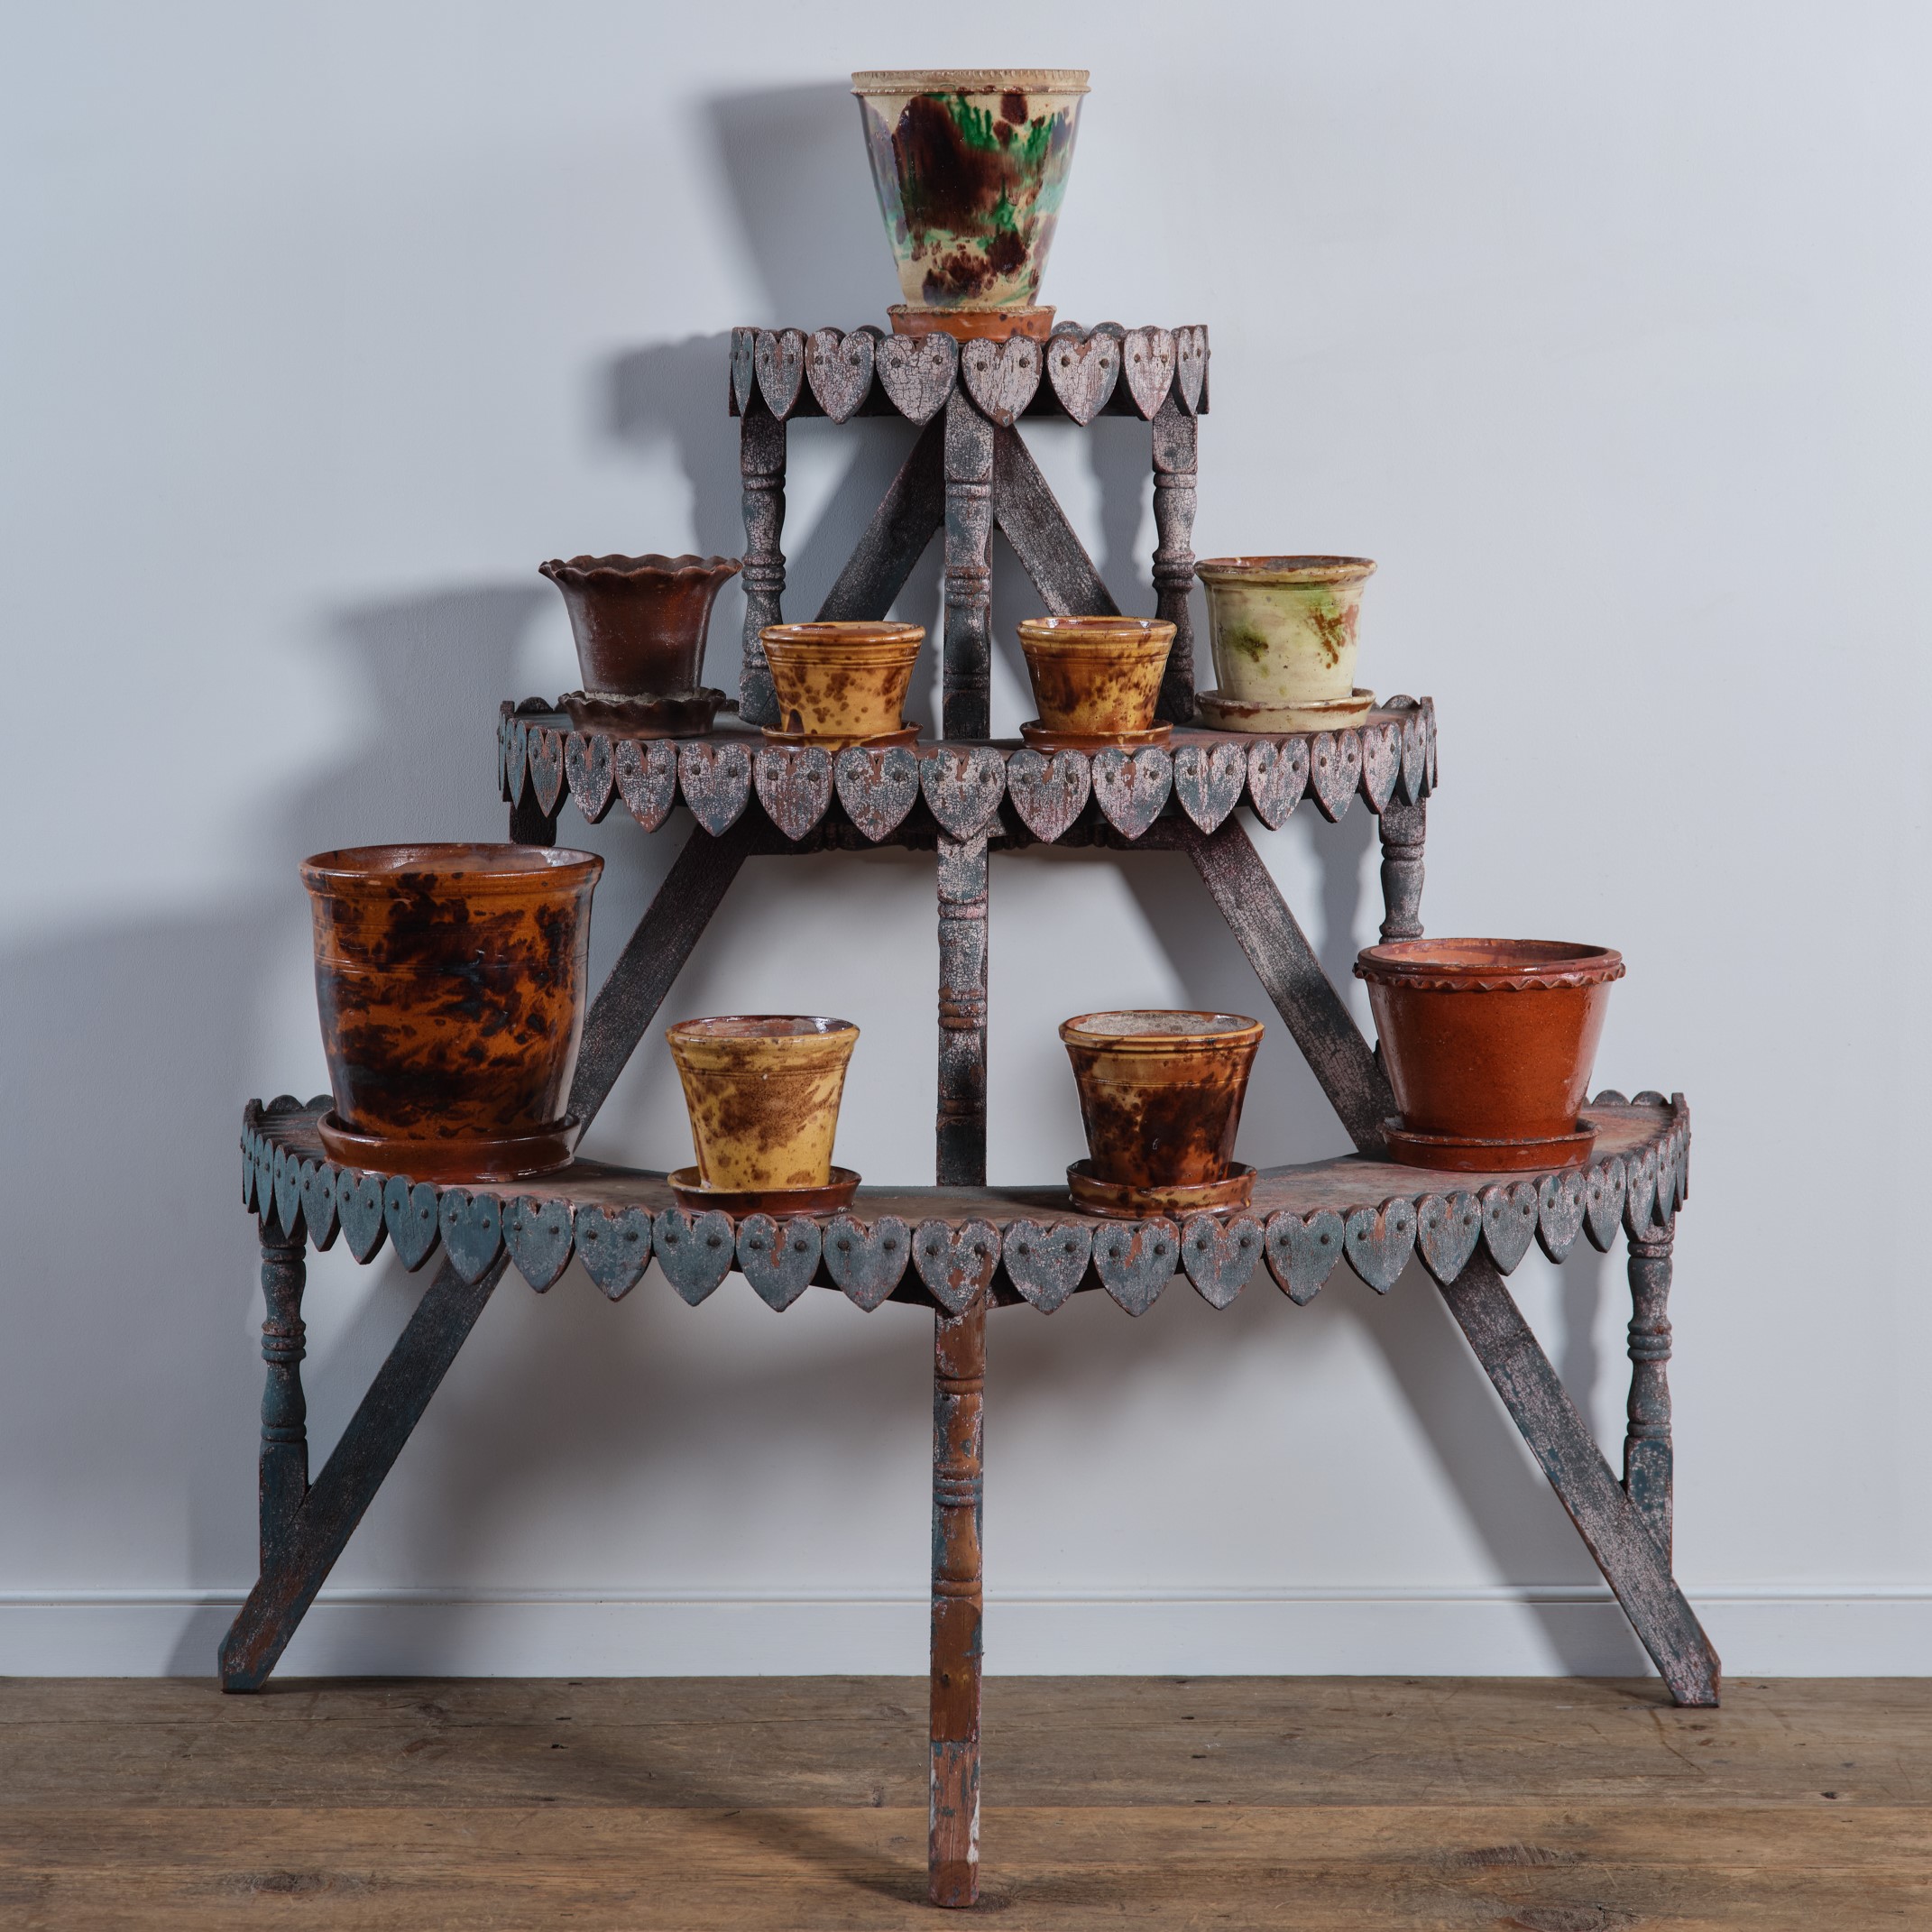 three-tier plant stand rel=